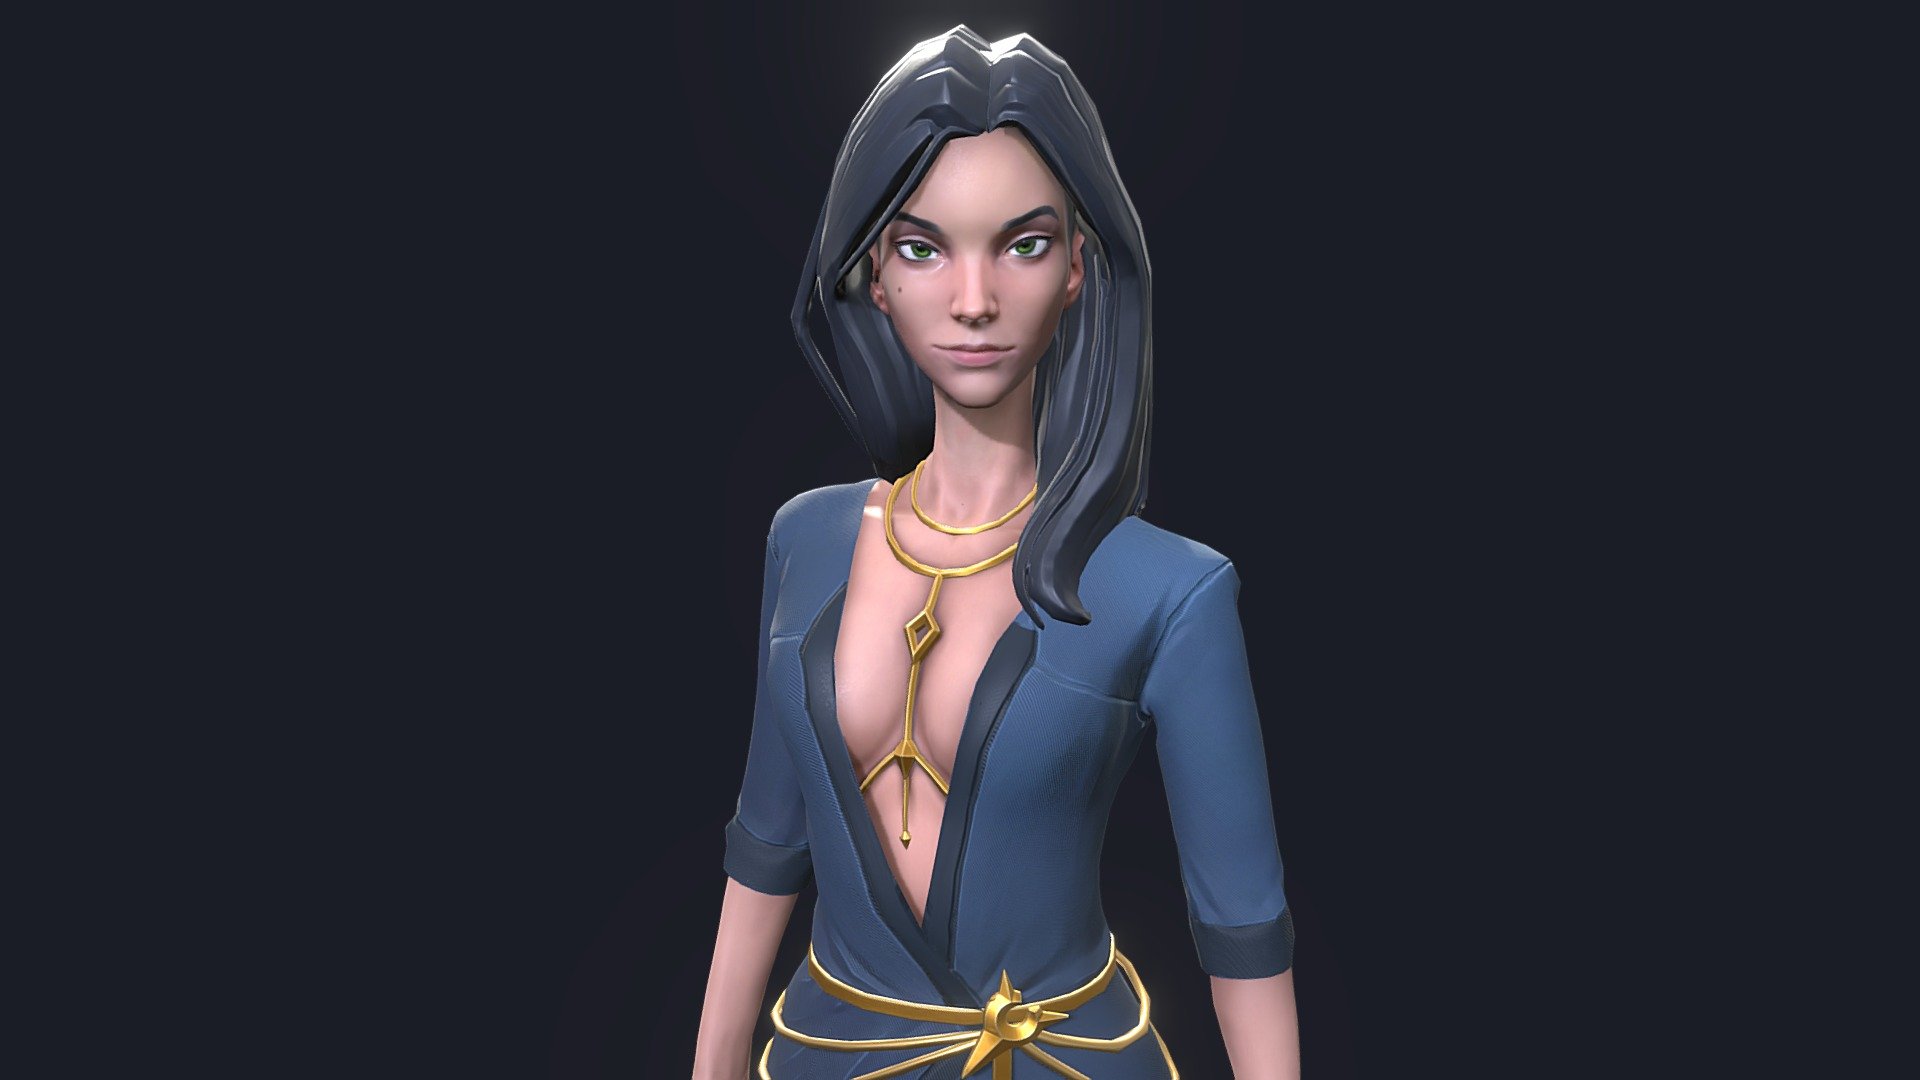 A character excersise I did last year

A collab I did with my friend and colleague Cloued Mckleanin

Cloued was responsible for the concept
Check his work out here:
https://www.artstation.com/artwork/lxarZz - Elegance - 3D model by dunx 3d model